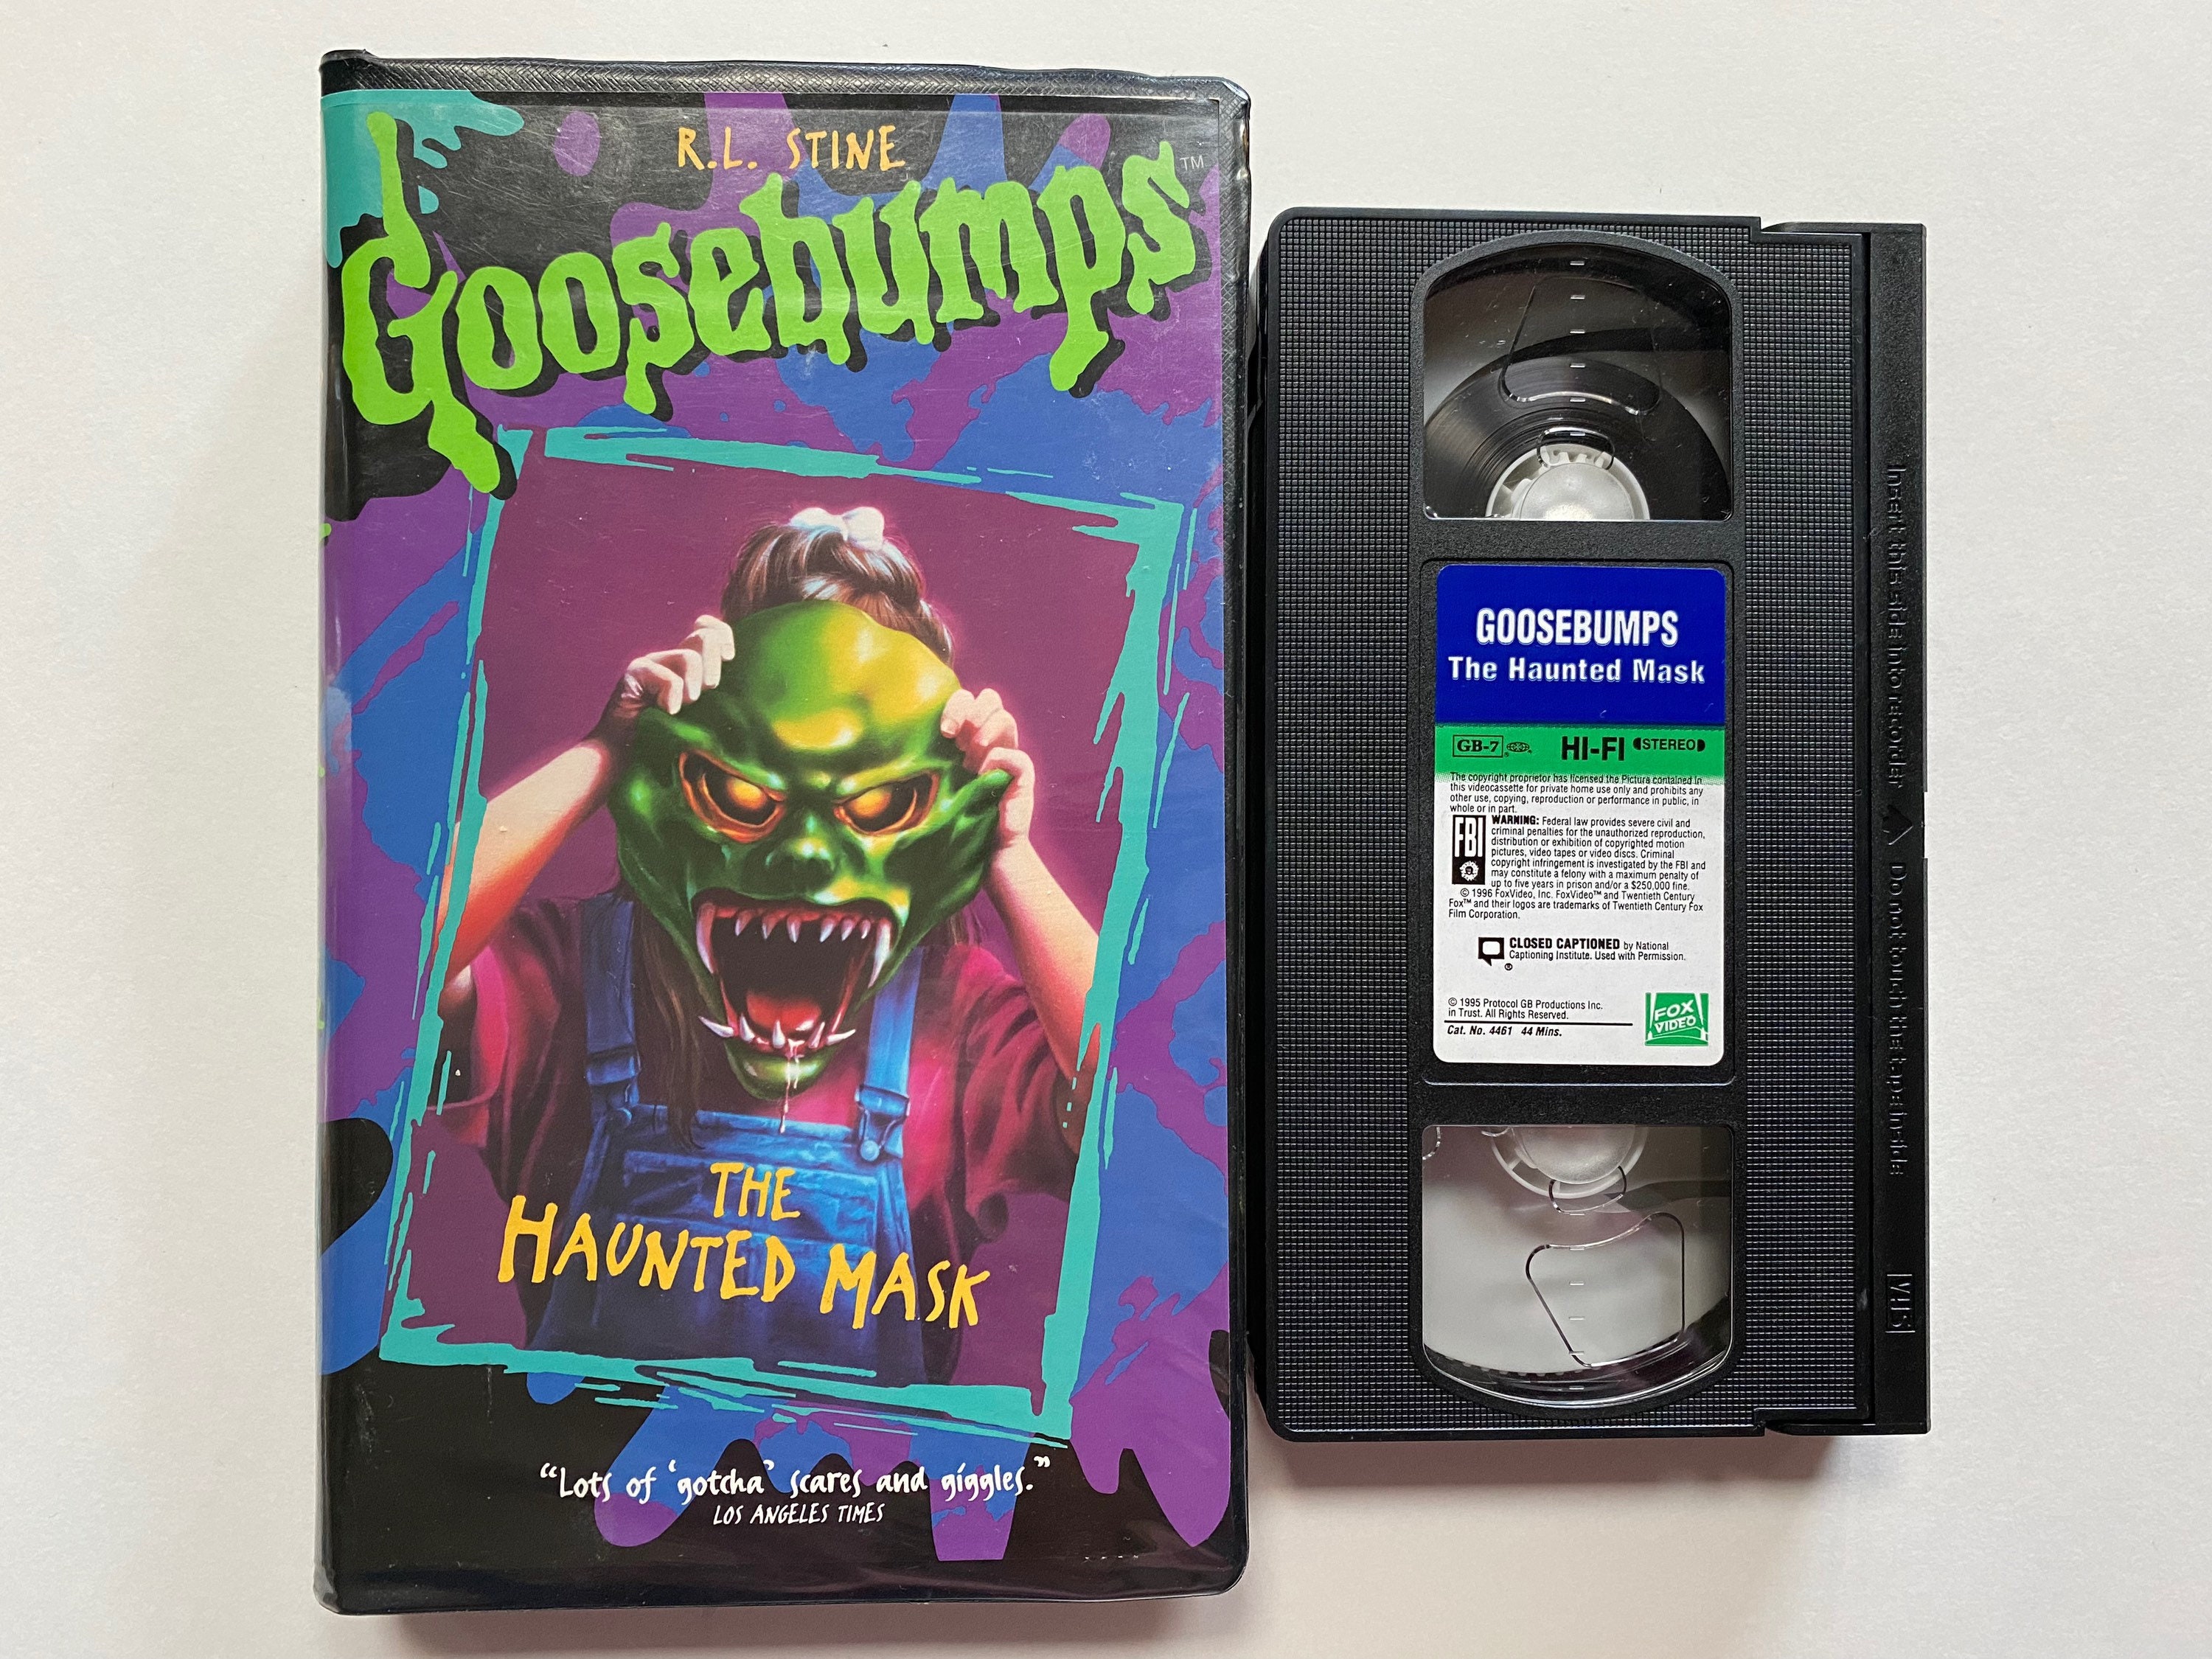 Goosebumps the Haunted Mask VHS Video Clamshell Collector Case - Etsy